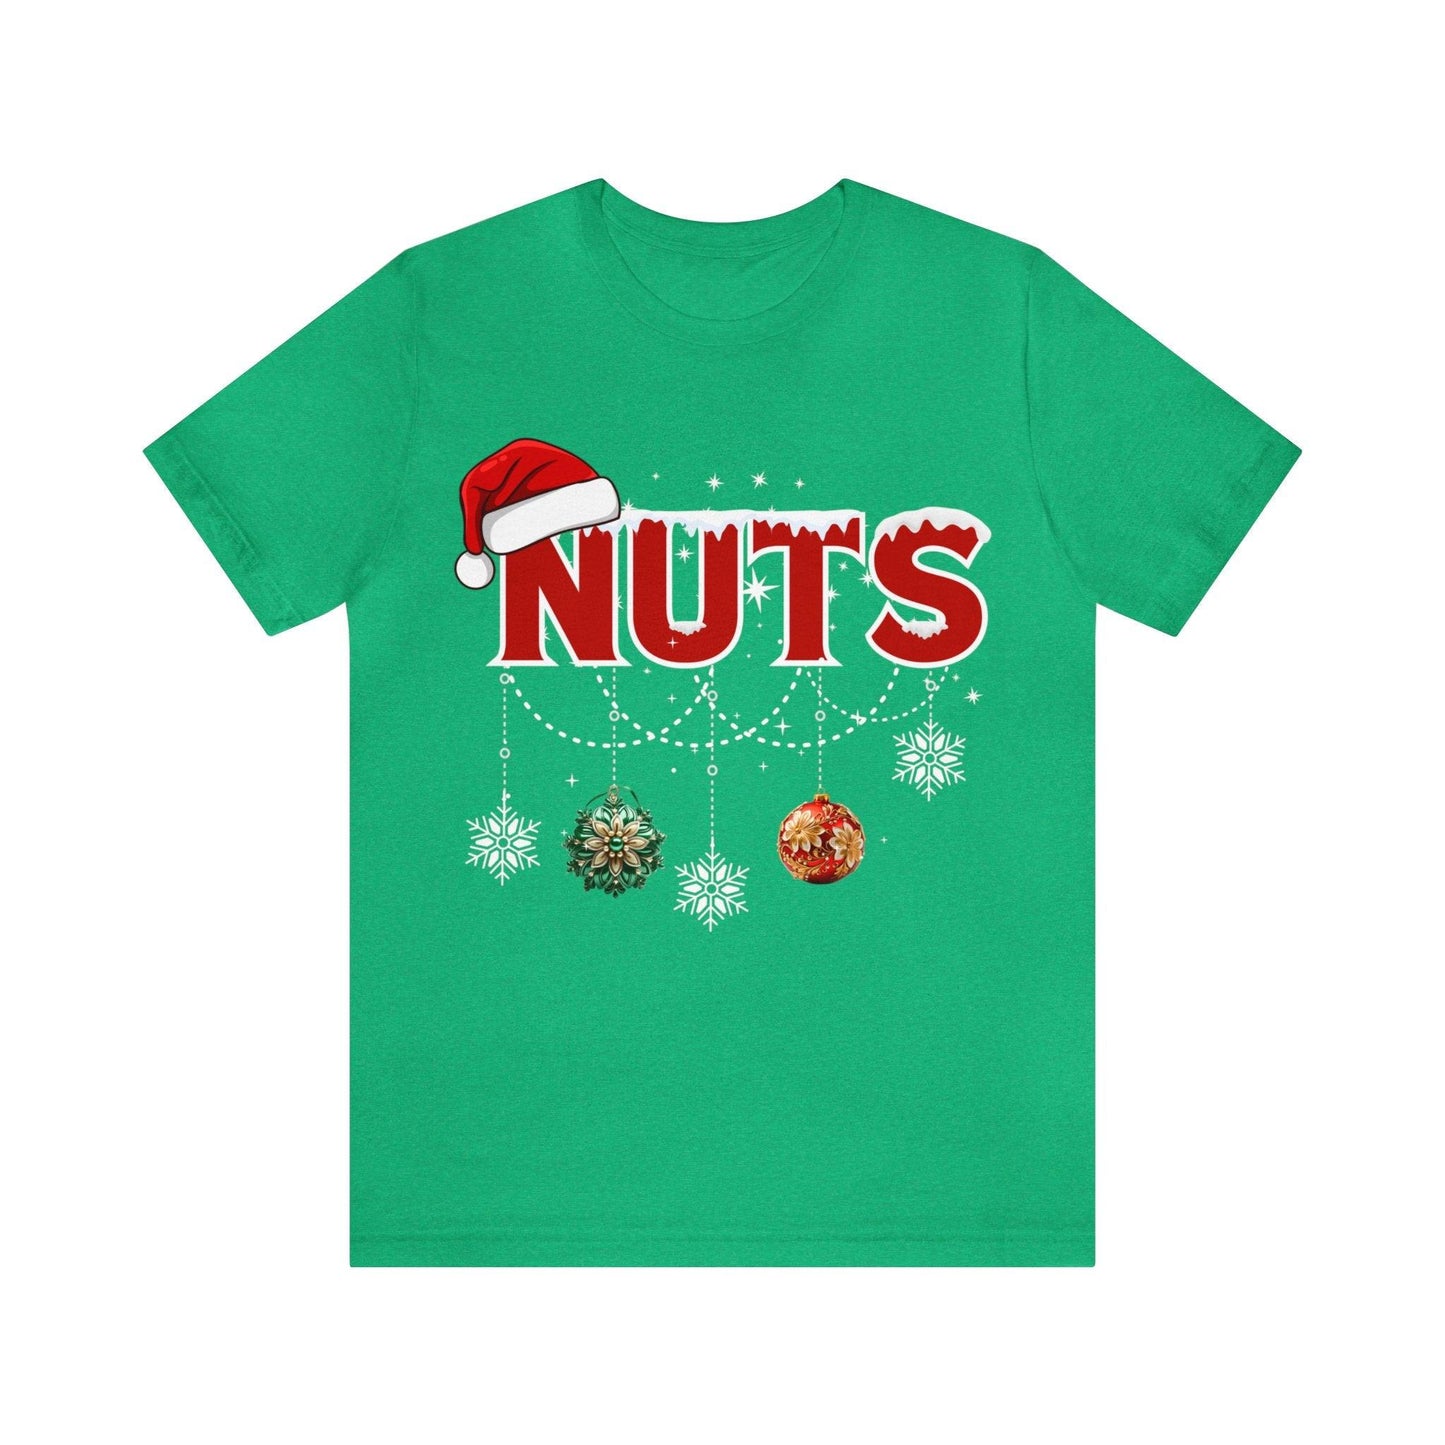 Funny Christmas Couples Matching Shirt Chest Nuts Shirts Holiday Shirt Cute Christmas Shirt Couple Sweater, Family Tee - Giftsmojo